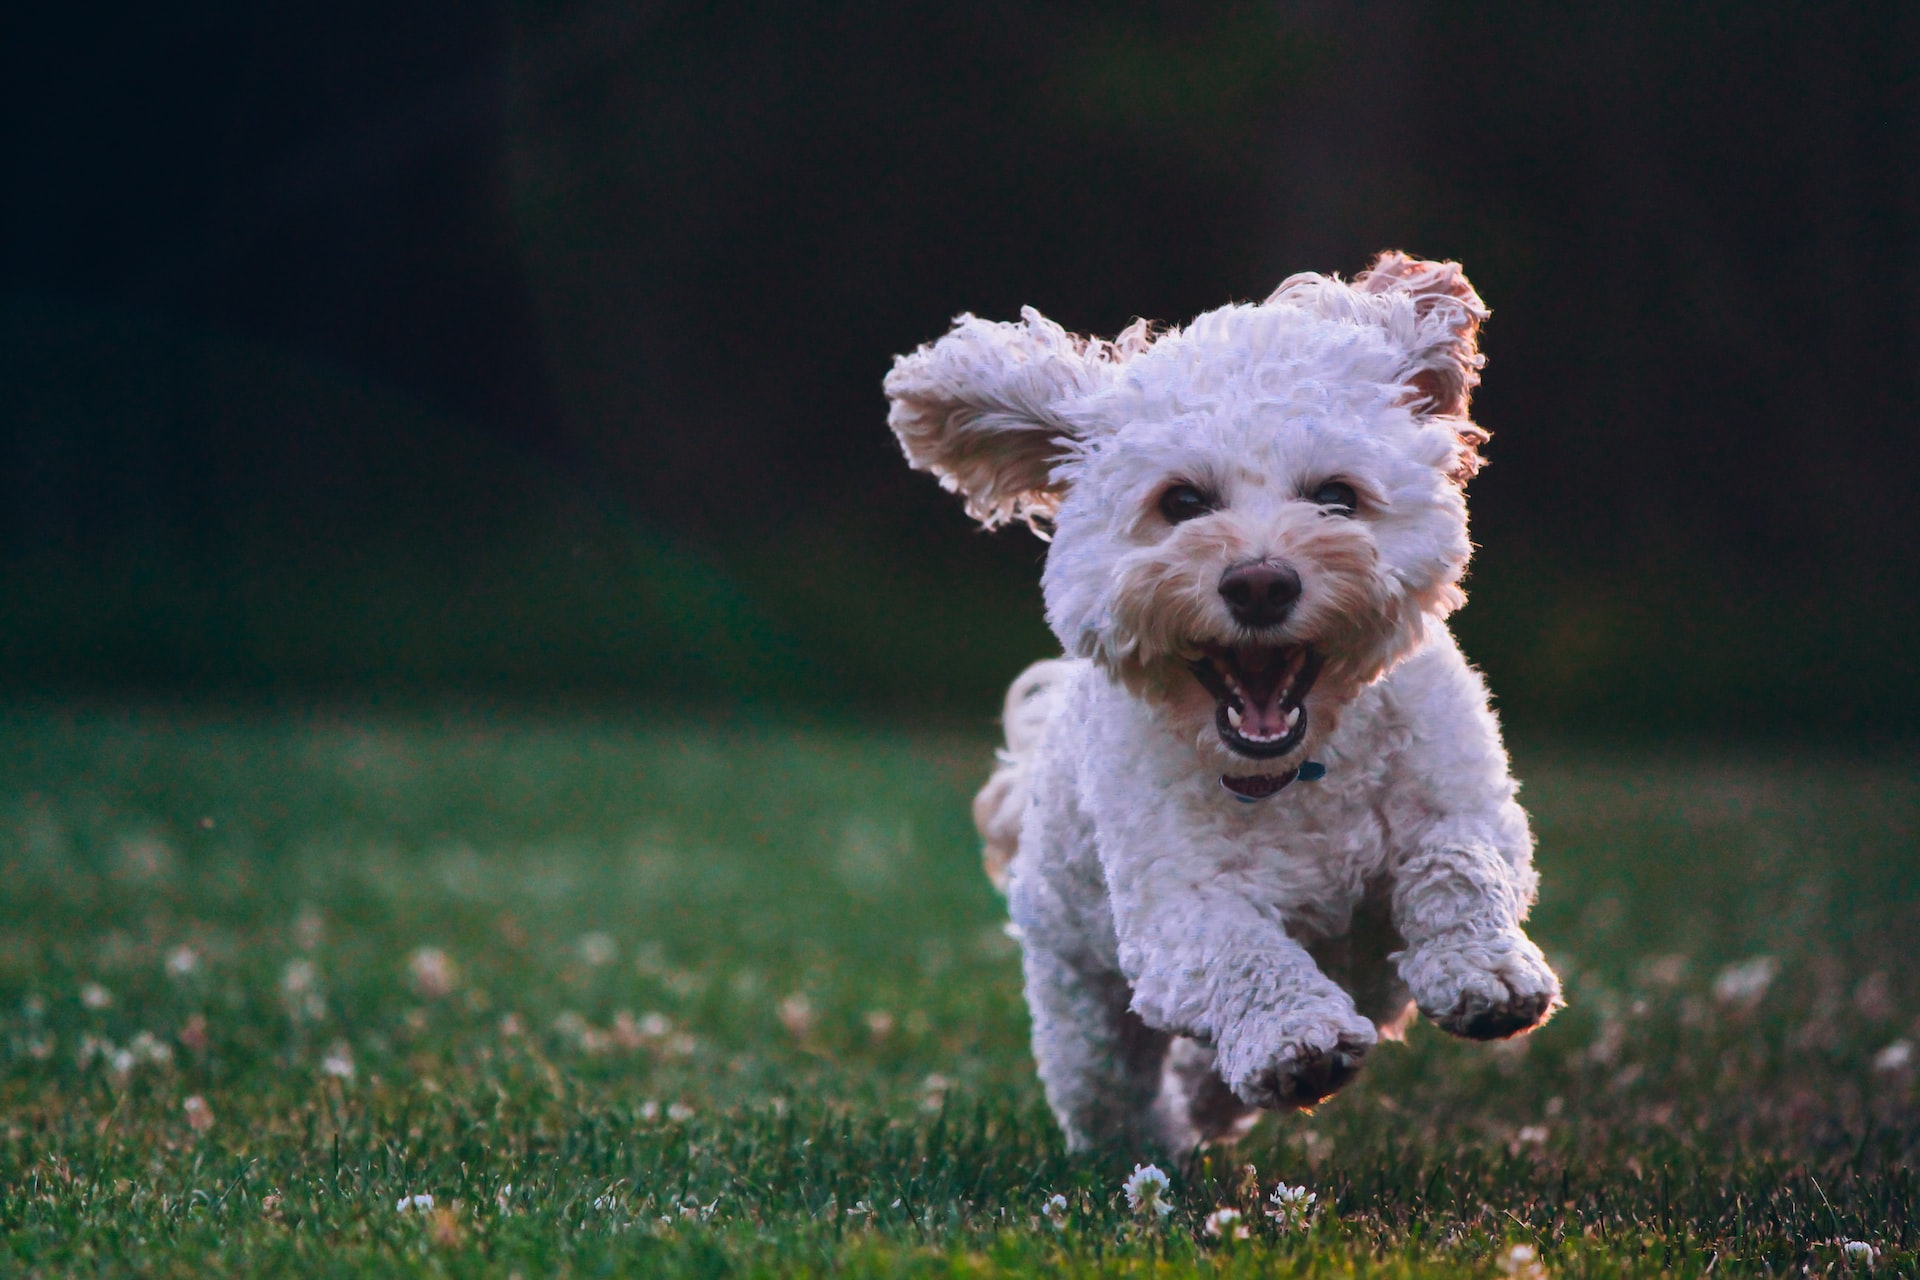 Little dog bounding and smiling